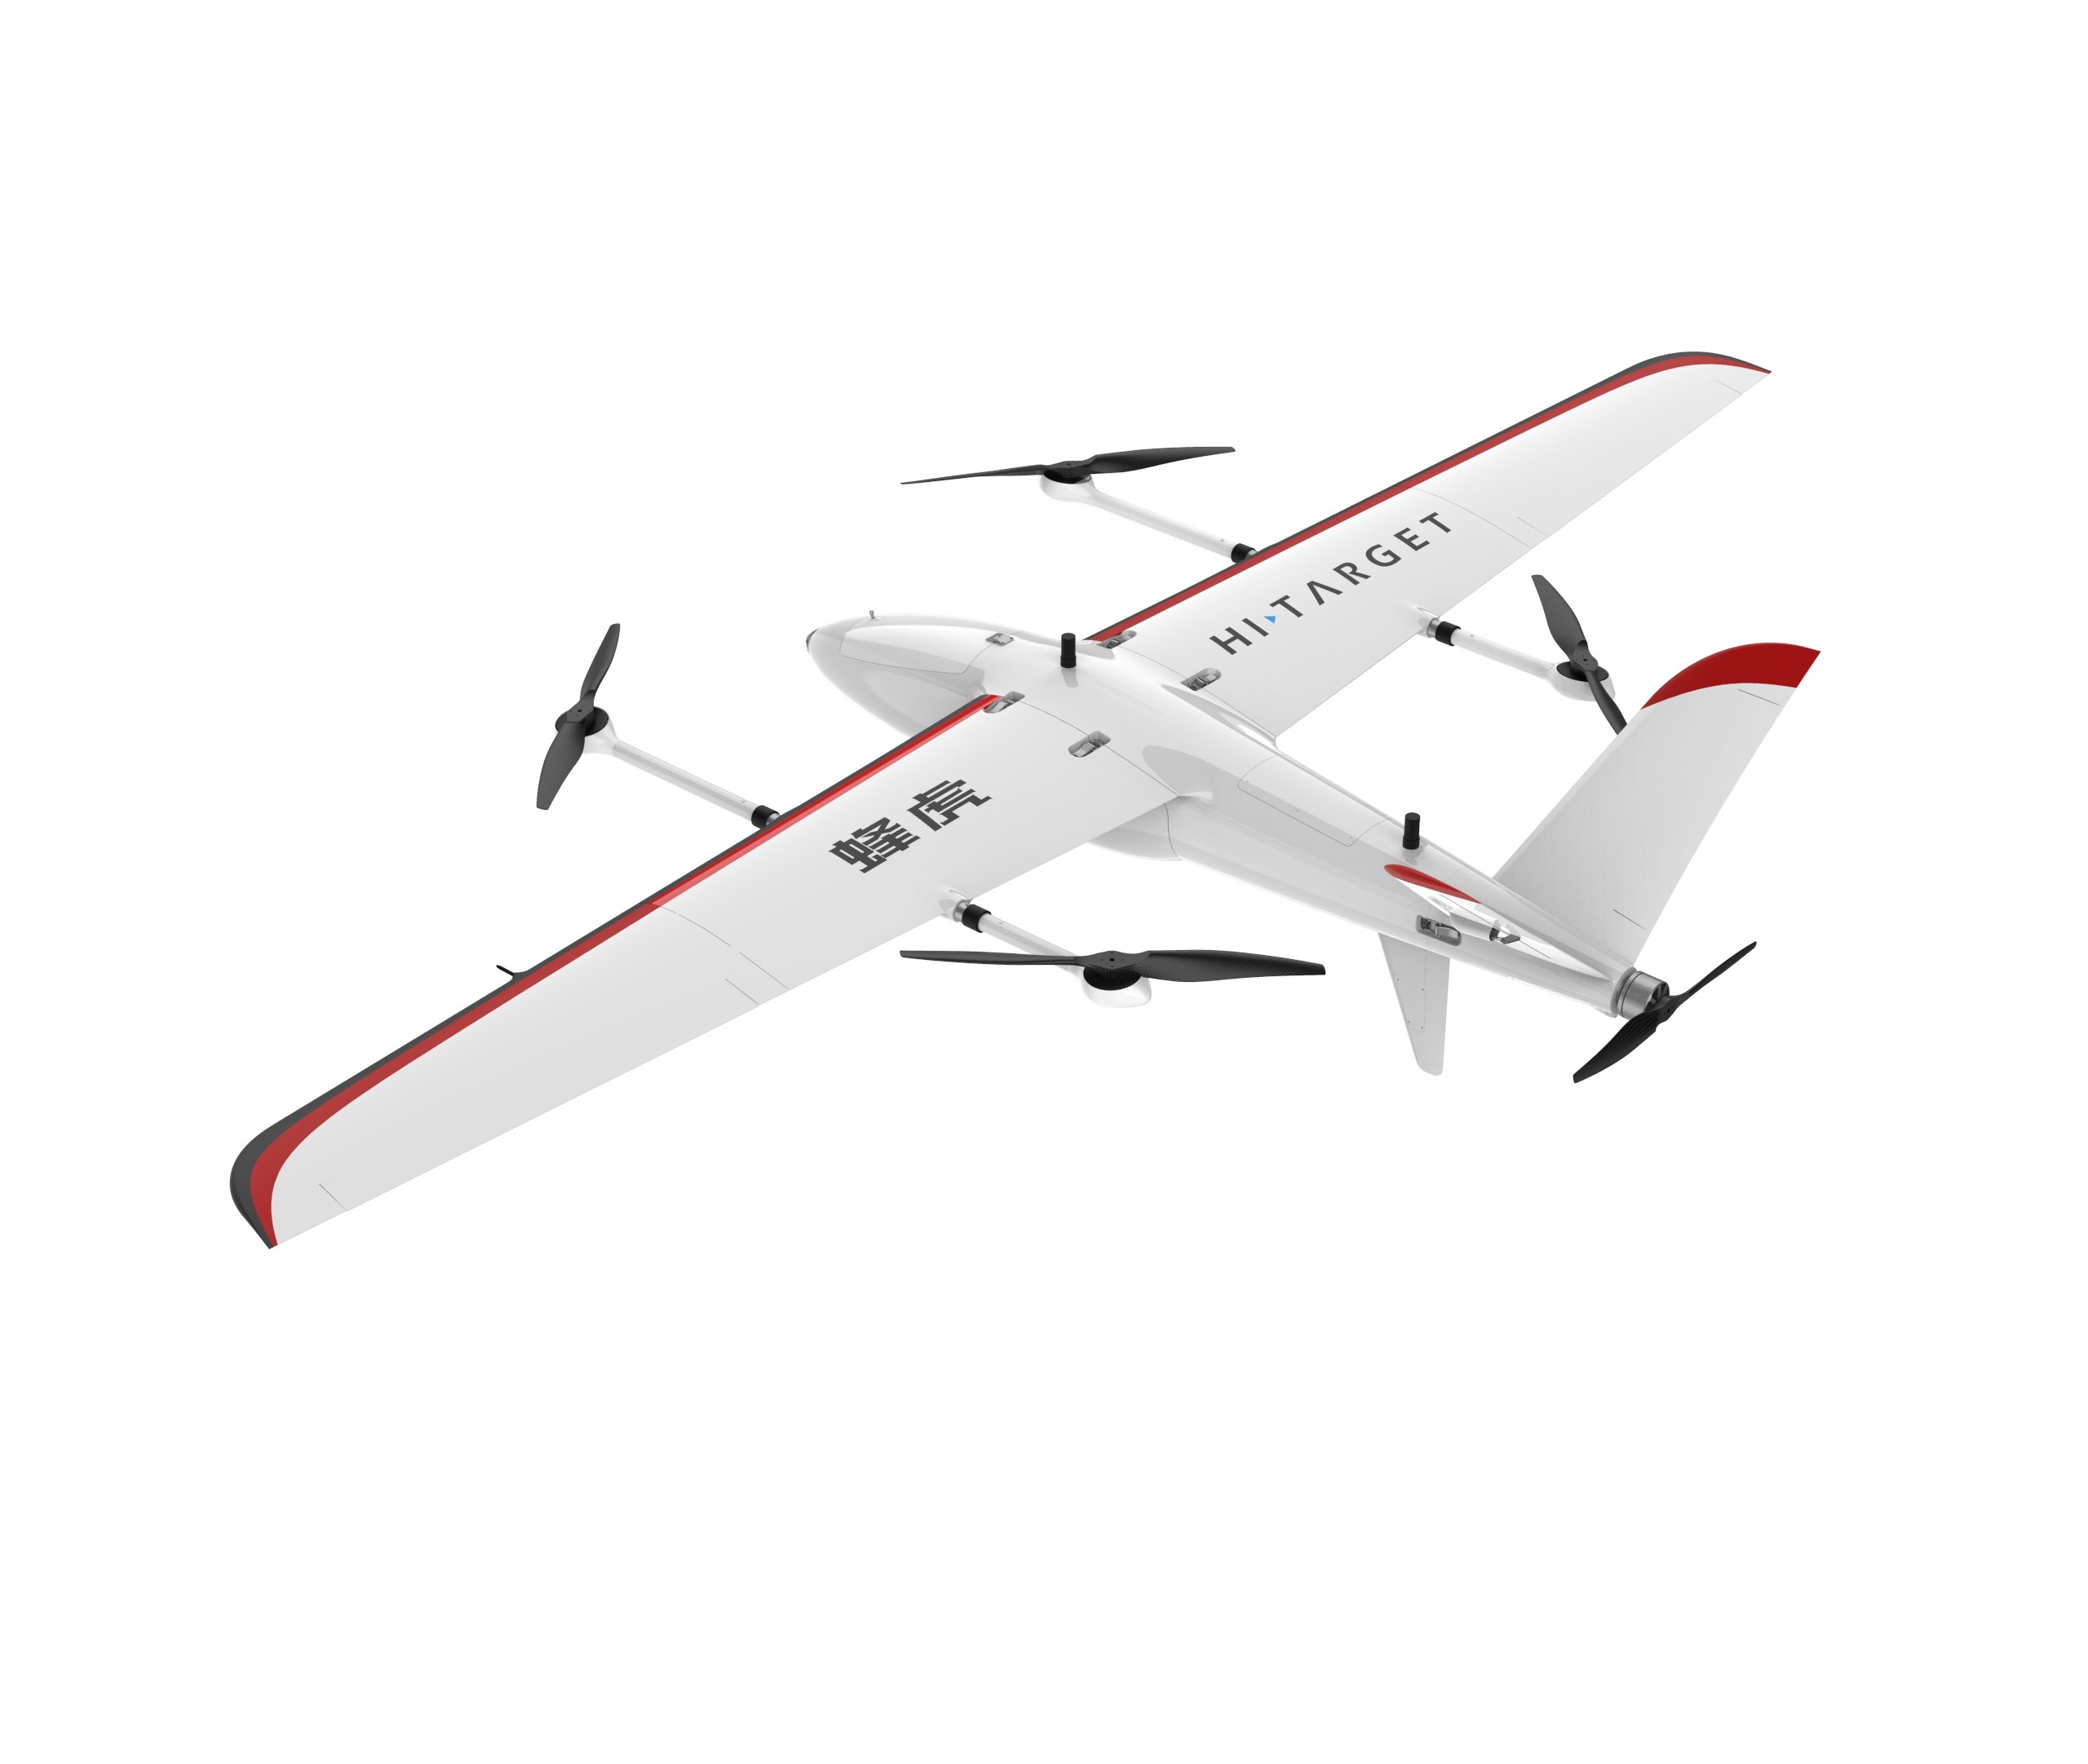  Max Payload 10kg FengHu VTOL Fixed Wing UAV Drone 75-100km/H Speed Manufactures